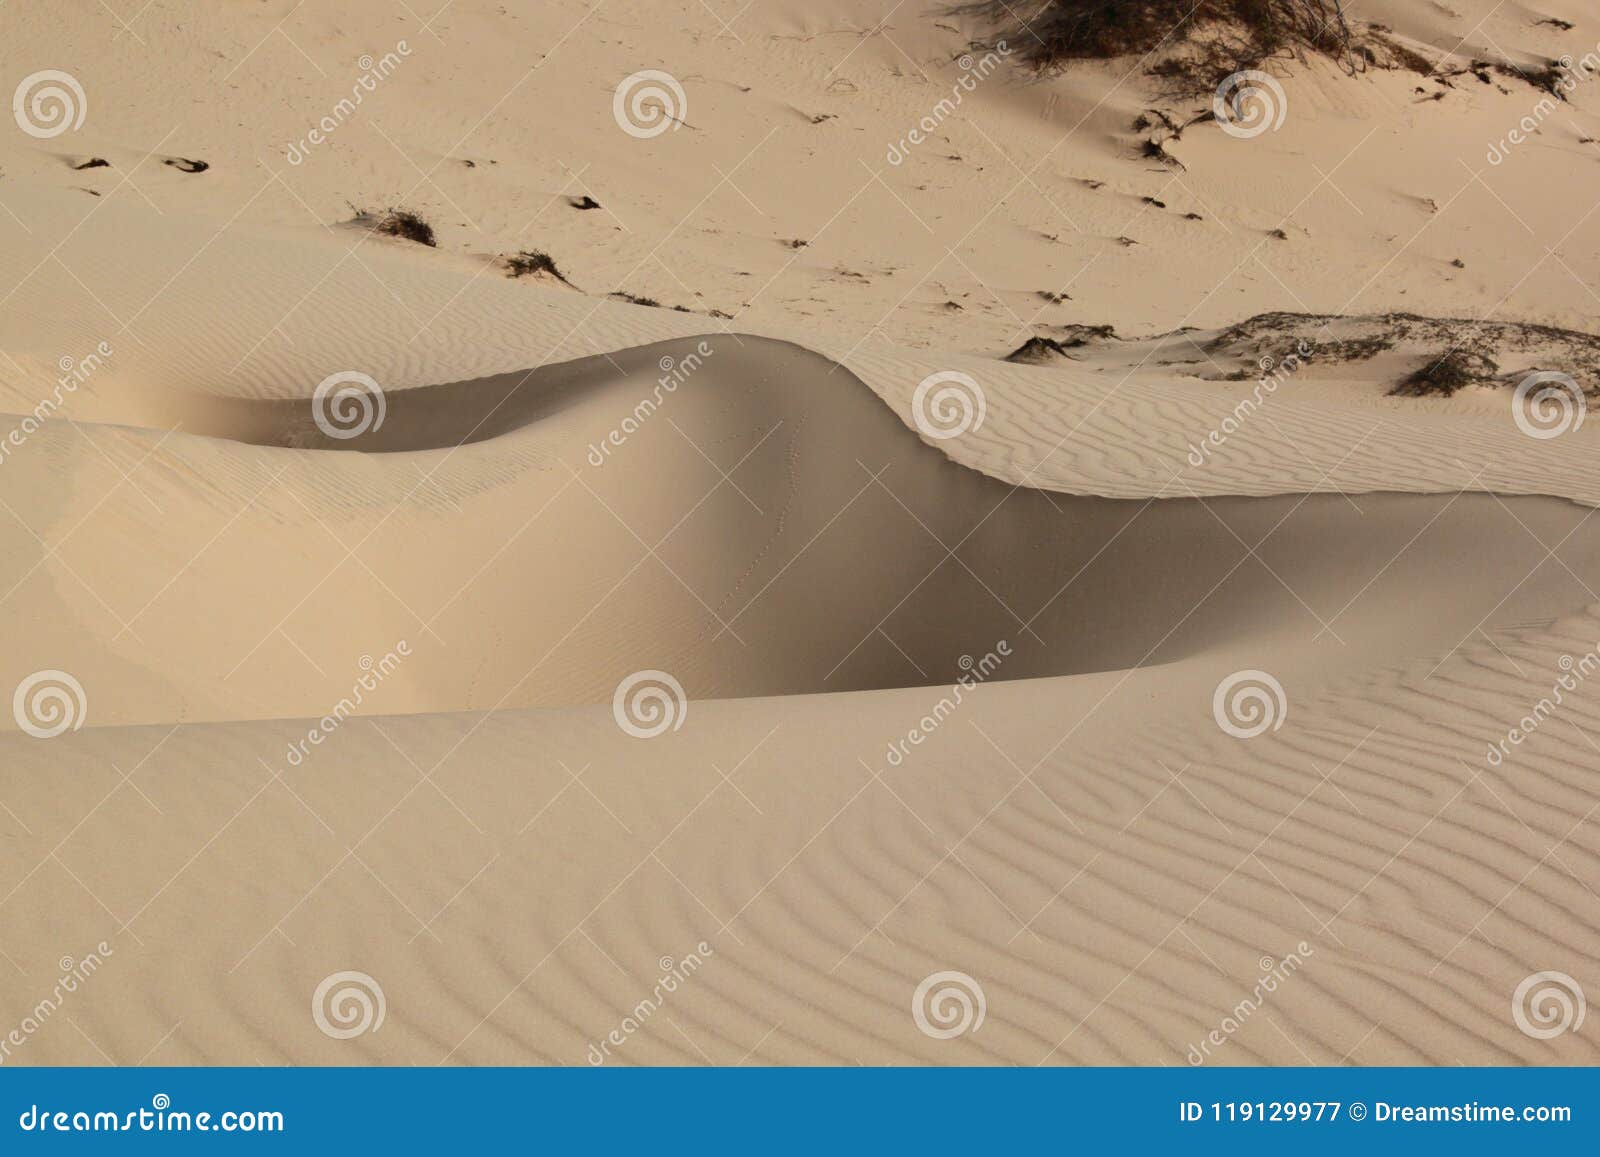 Quirks of the Desert. Nora in the Sand Dune Stock Image - Image of  beautiful, double: 119129977